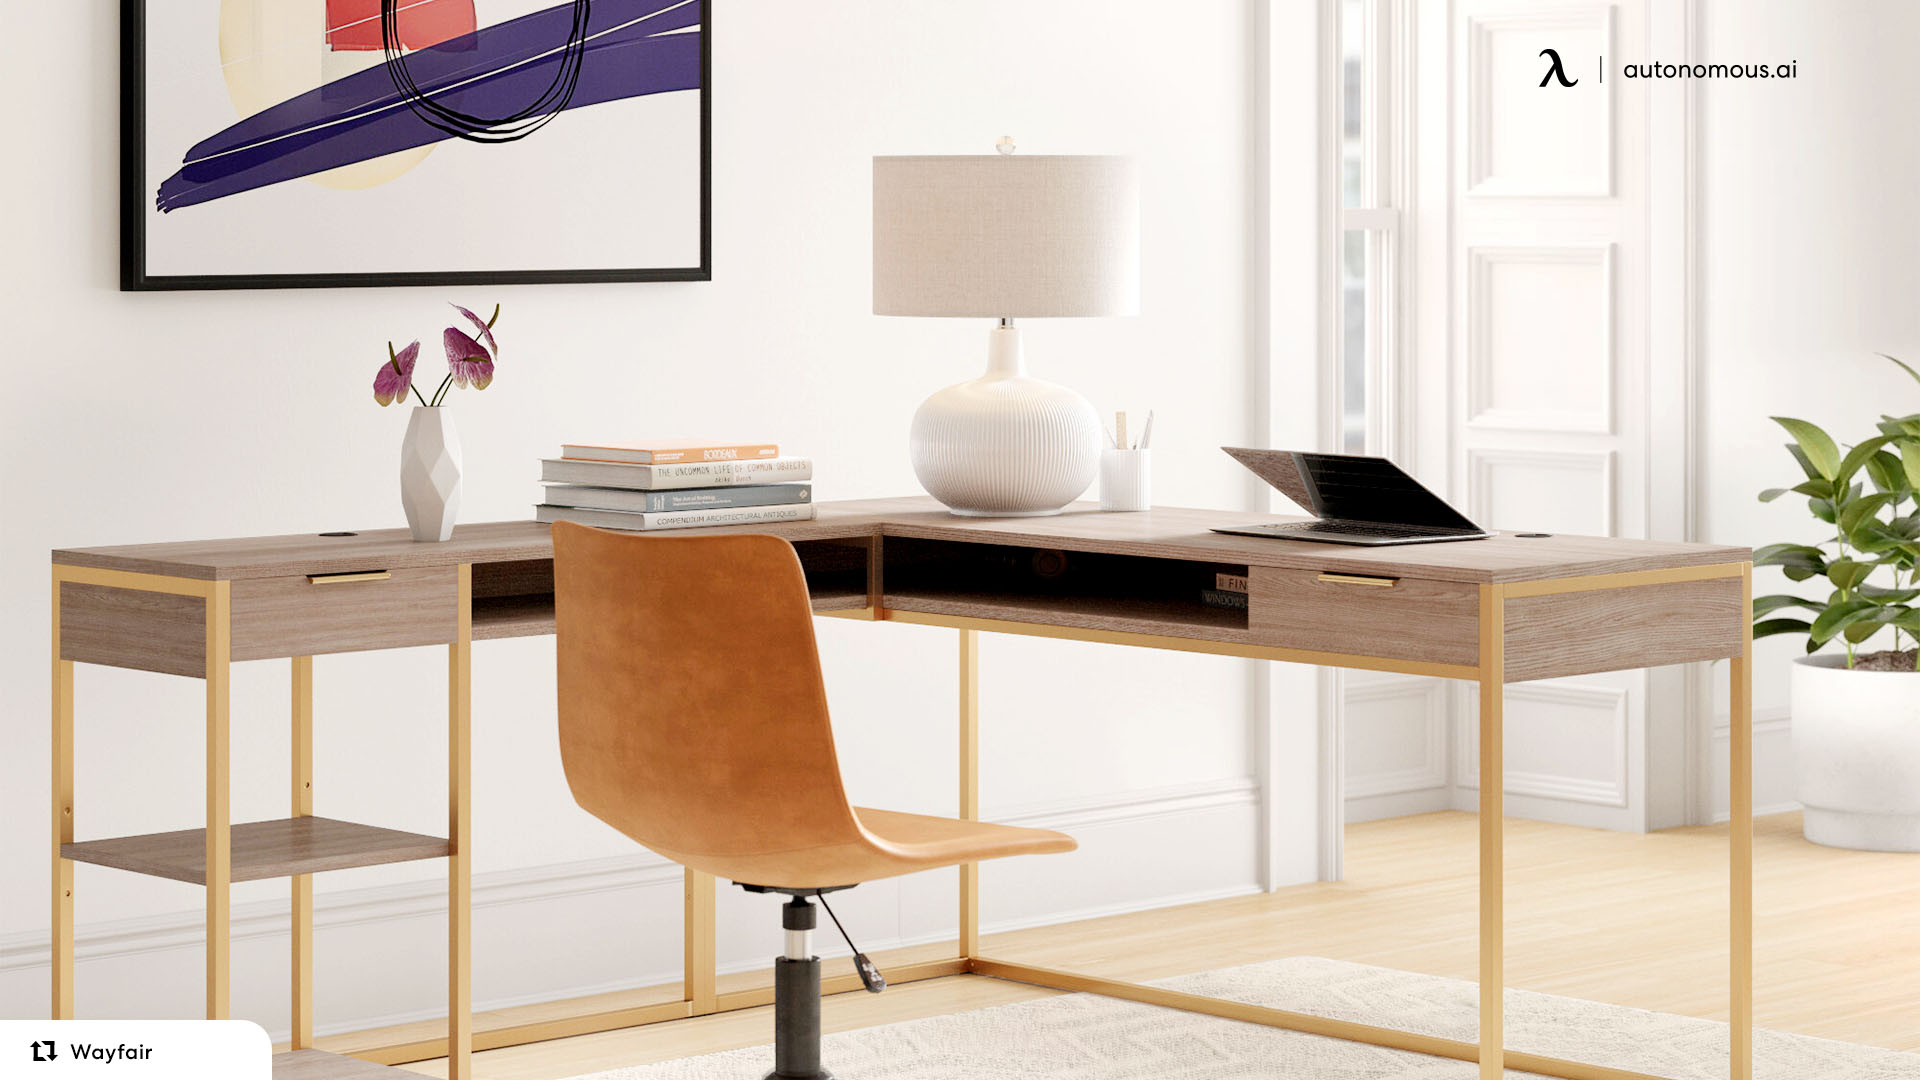 More Professional Look with L-shaped desk for a home office